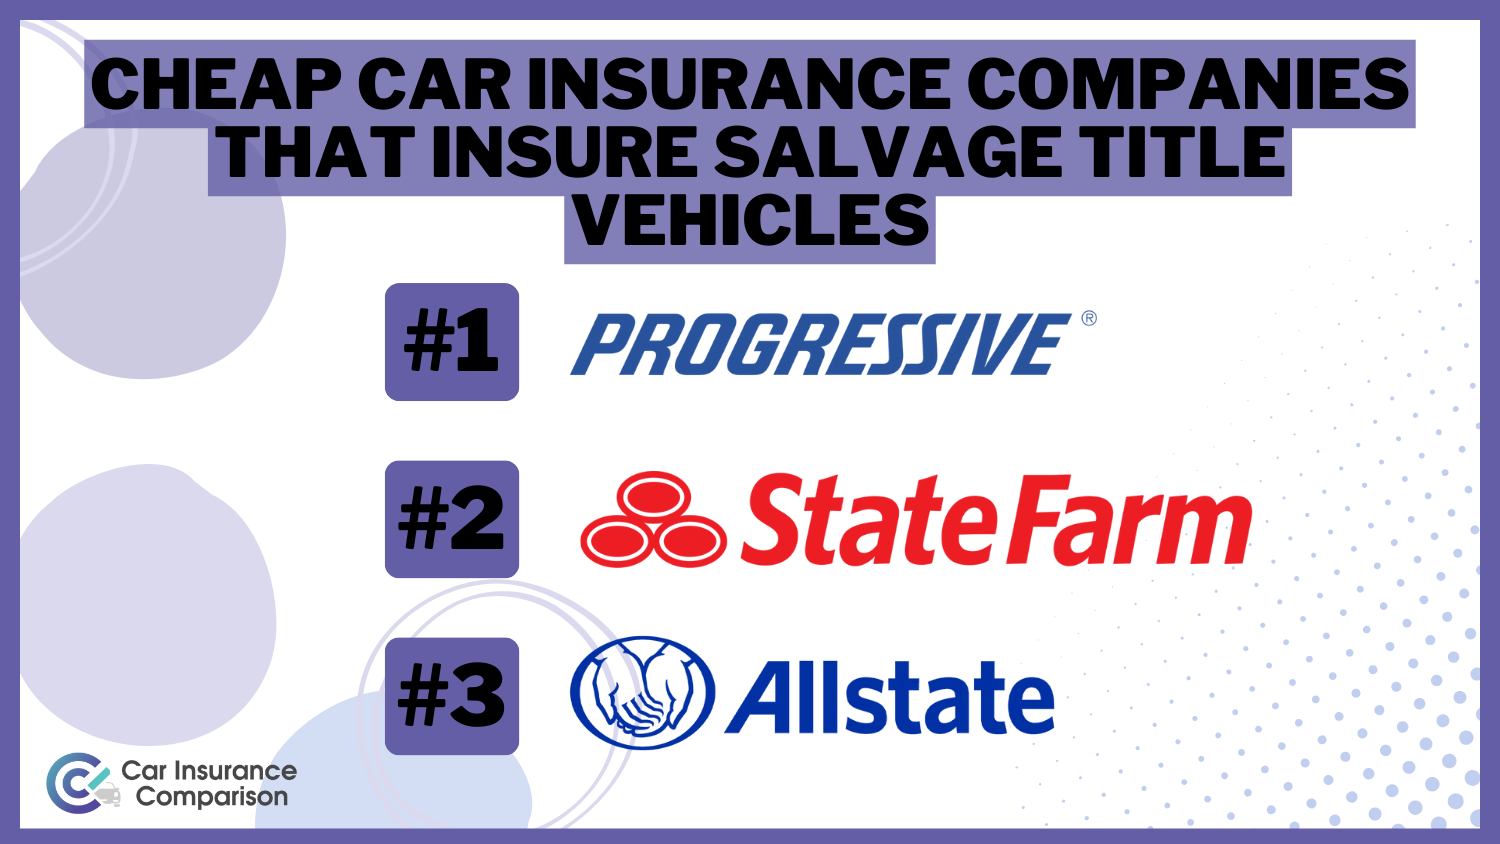 Cheap Car Insurance Companies That Insure Salvage Title Vehicles: Progressive, State Farm and Allstate